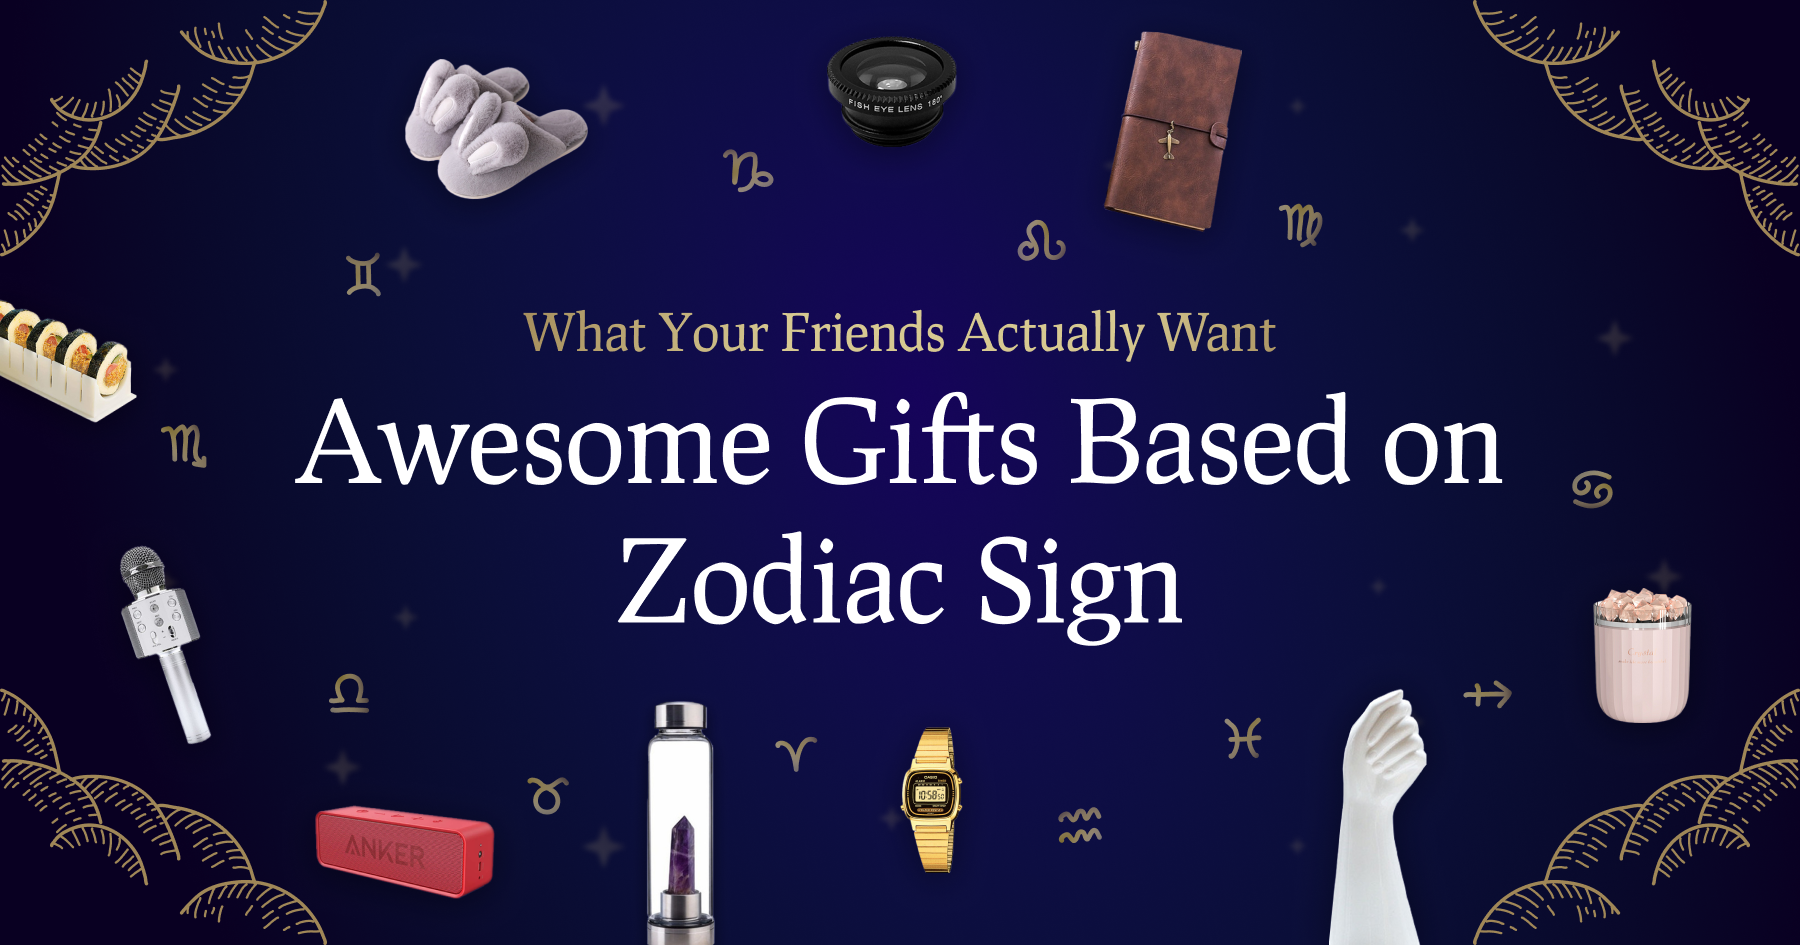 What Your Friends Actually Want: Awesome Gifts Based on Zodiac Sign